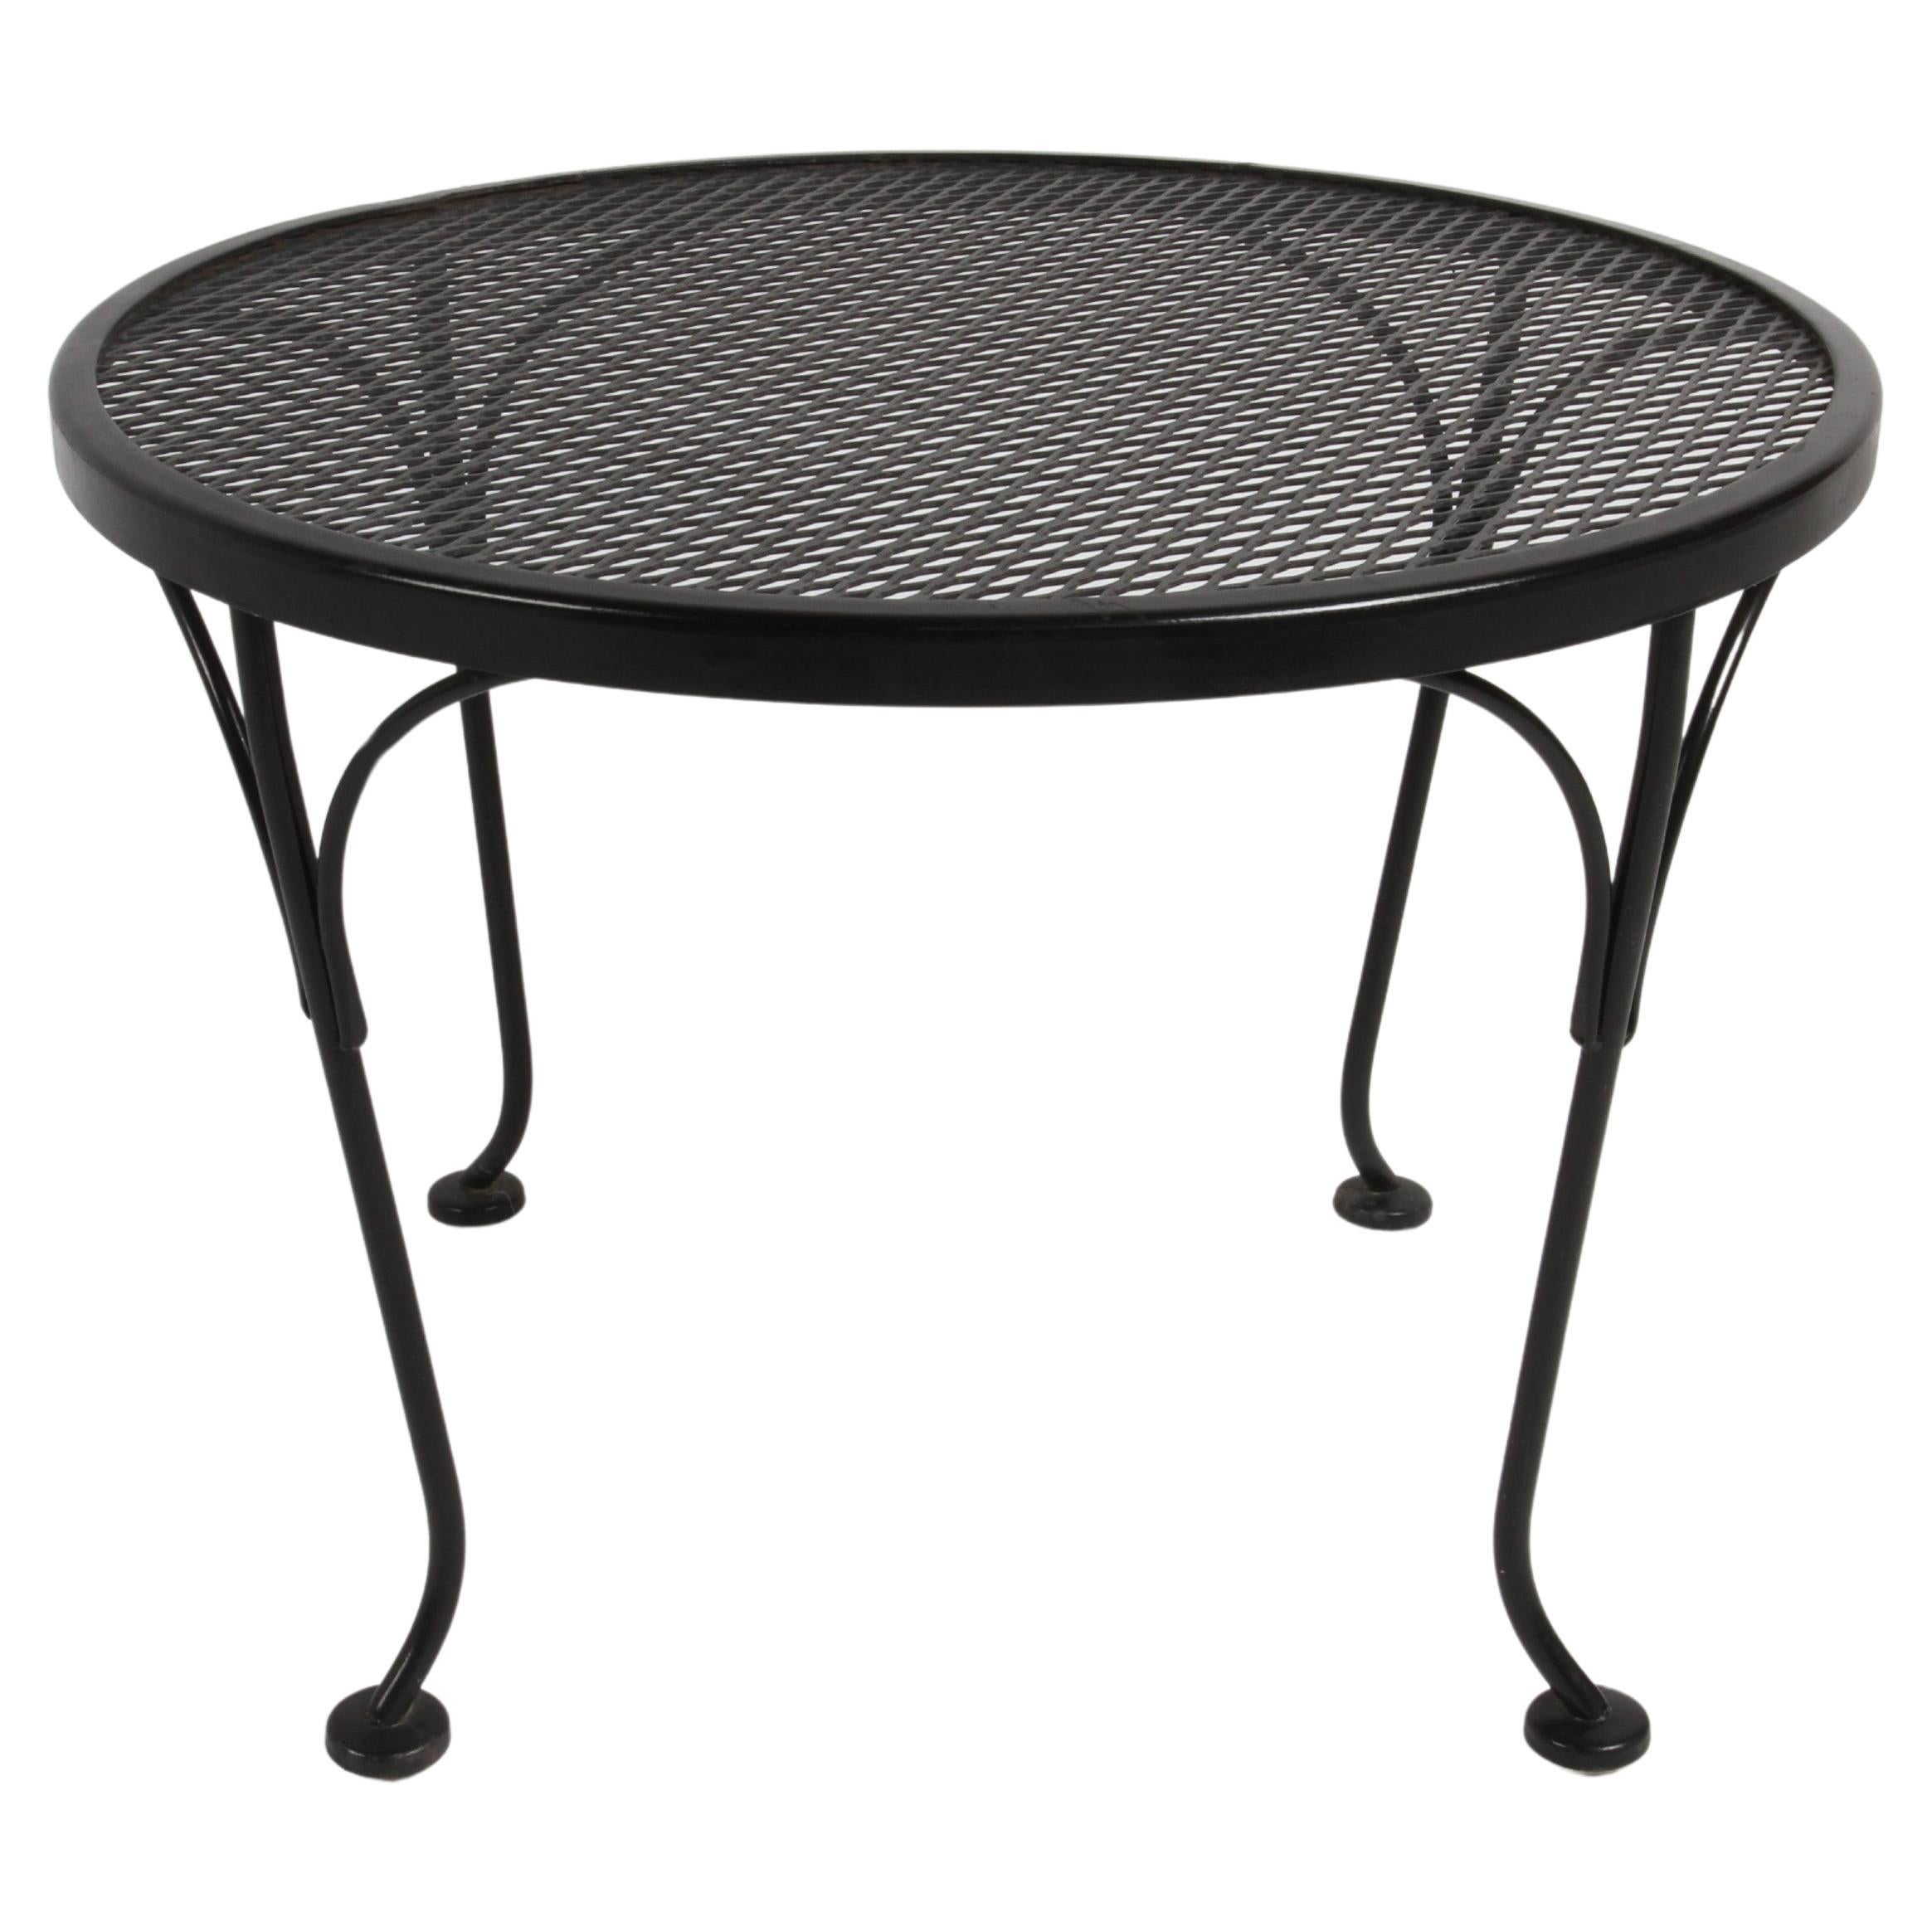 Russell Woodard Round Black Wrought Iron & Mesh Patio Coffee of Side Table 